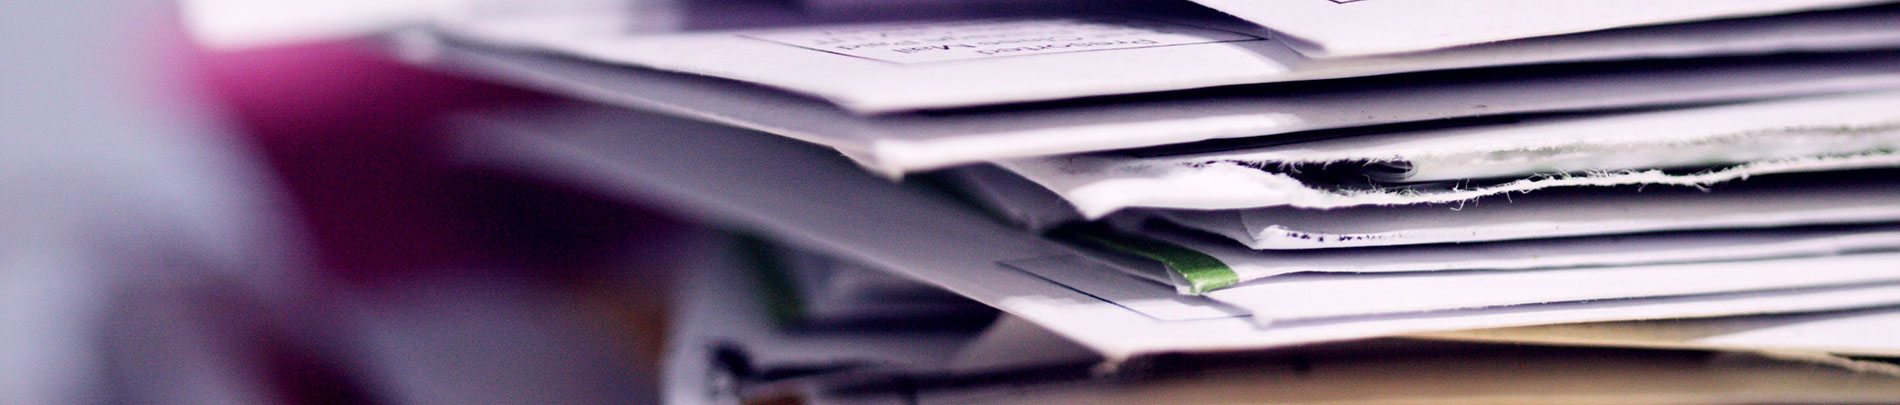 A stack of documents and opened envelopes.